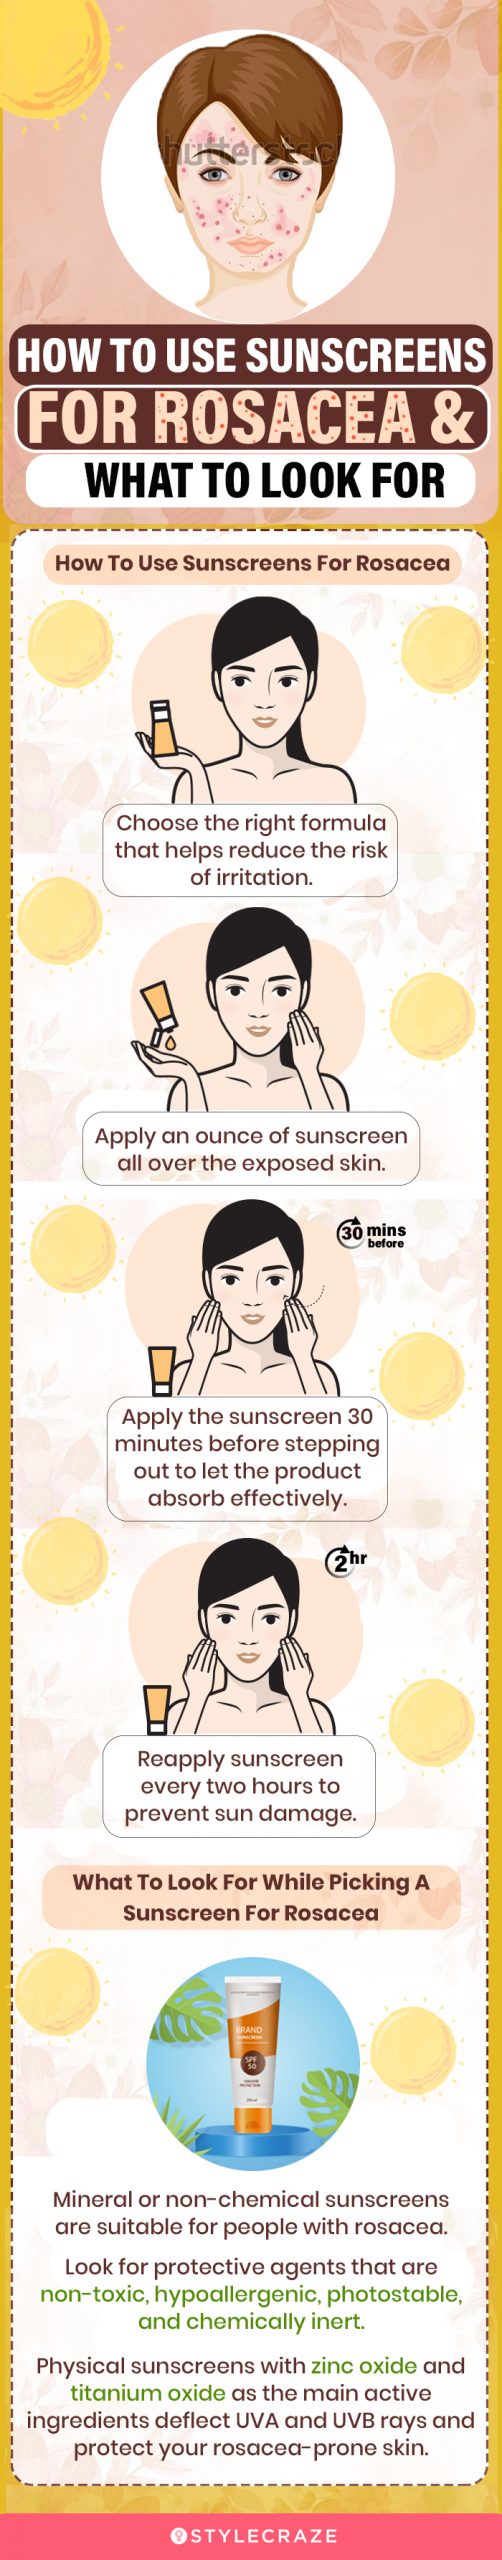 How To Use Sunscreens For Rosacea & What To Look For [infographic]